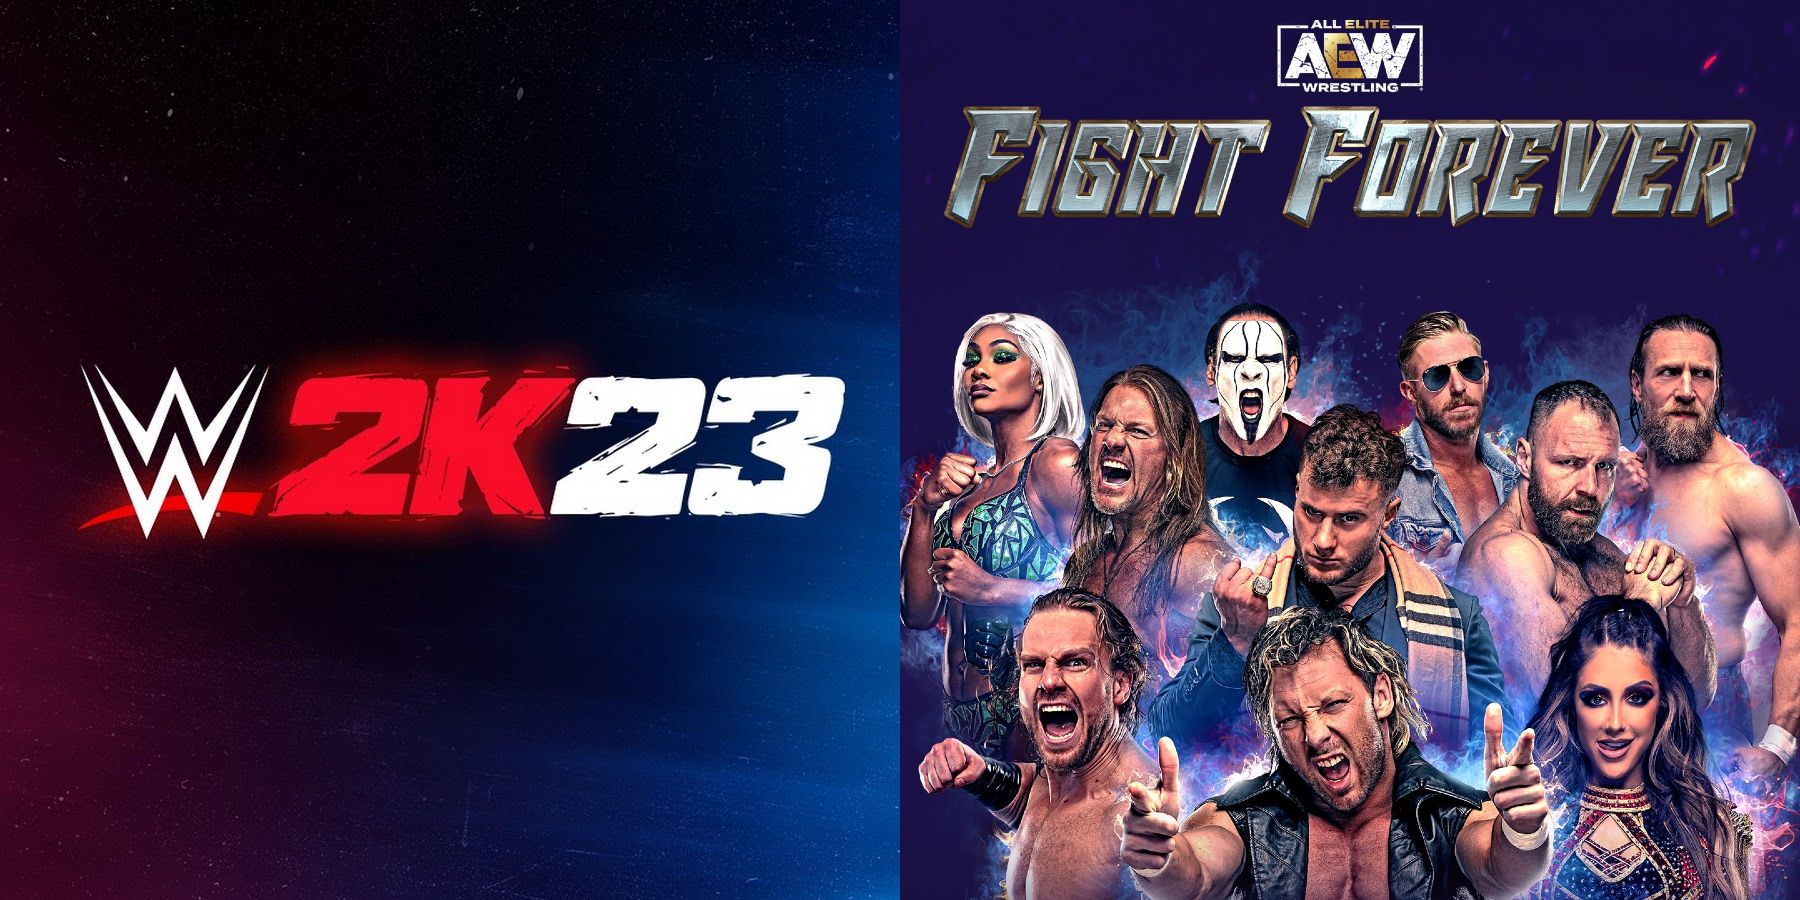 WWE 2K24 Needs To Implement One Great AEW Fight Forever Feature